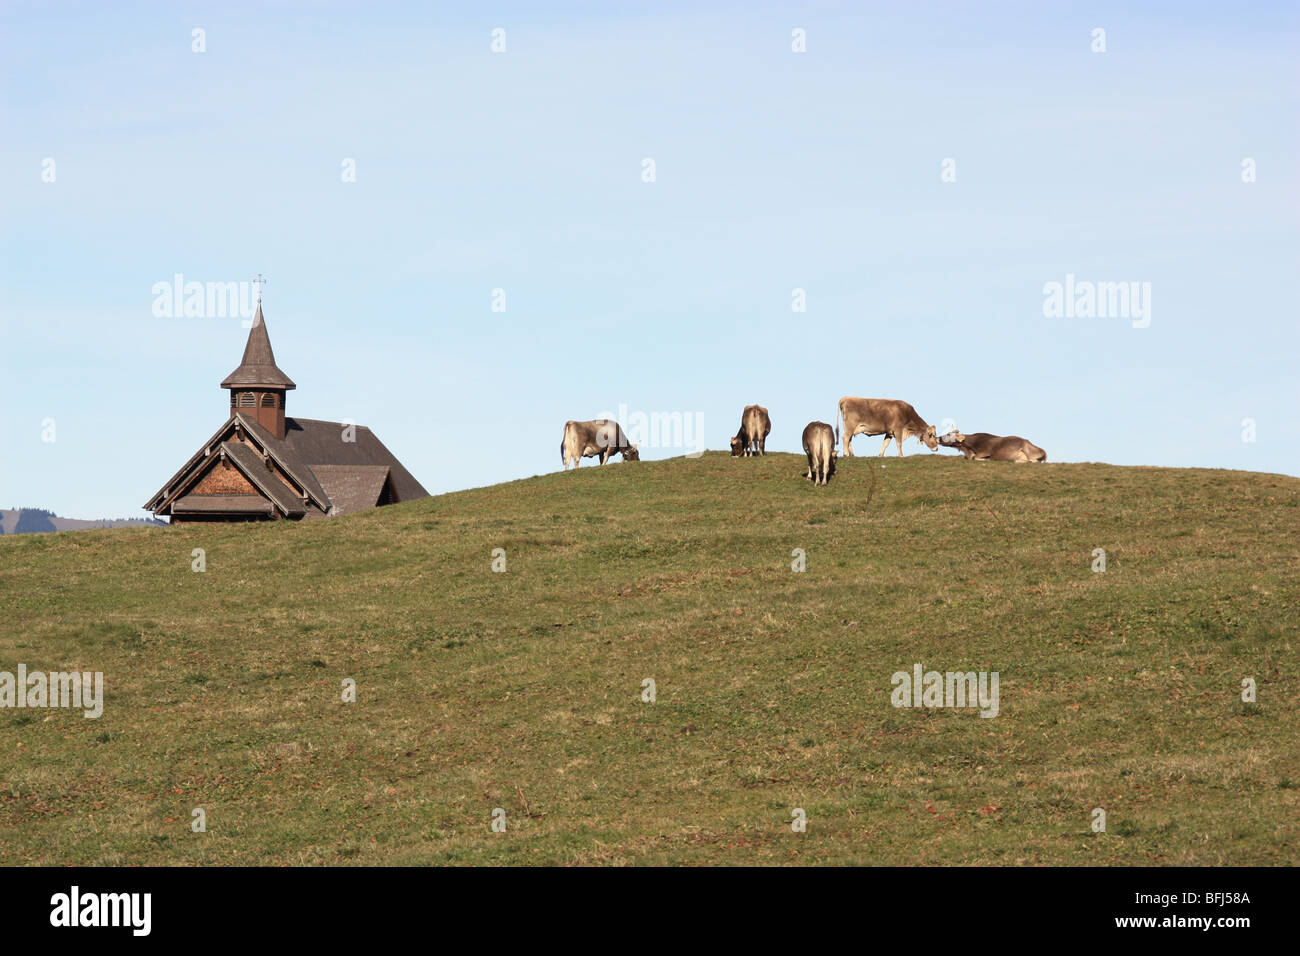 cow scenery with church building. Rural chapel on the horizon, with a group of brown and white cows grazing on a green meadow before the blue sky. Stock Photo